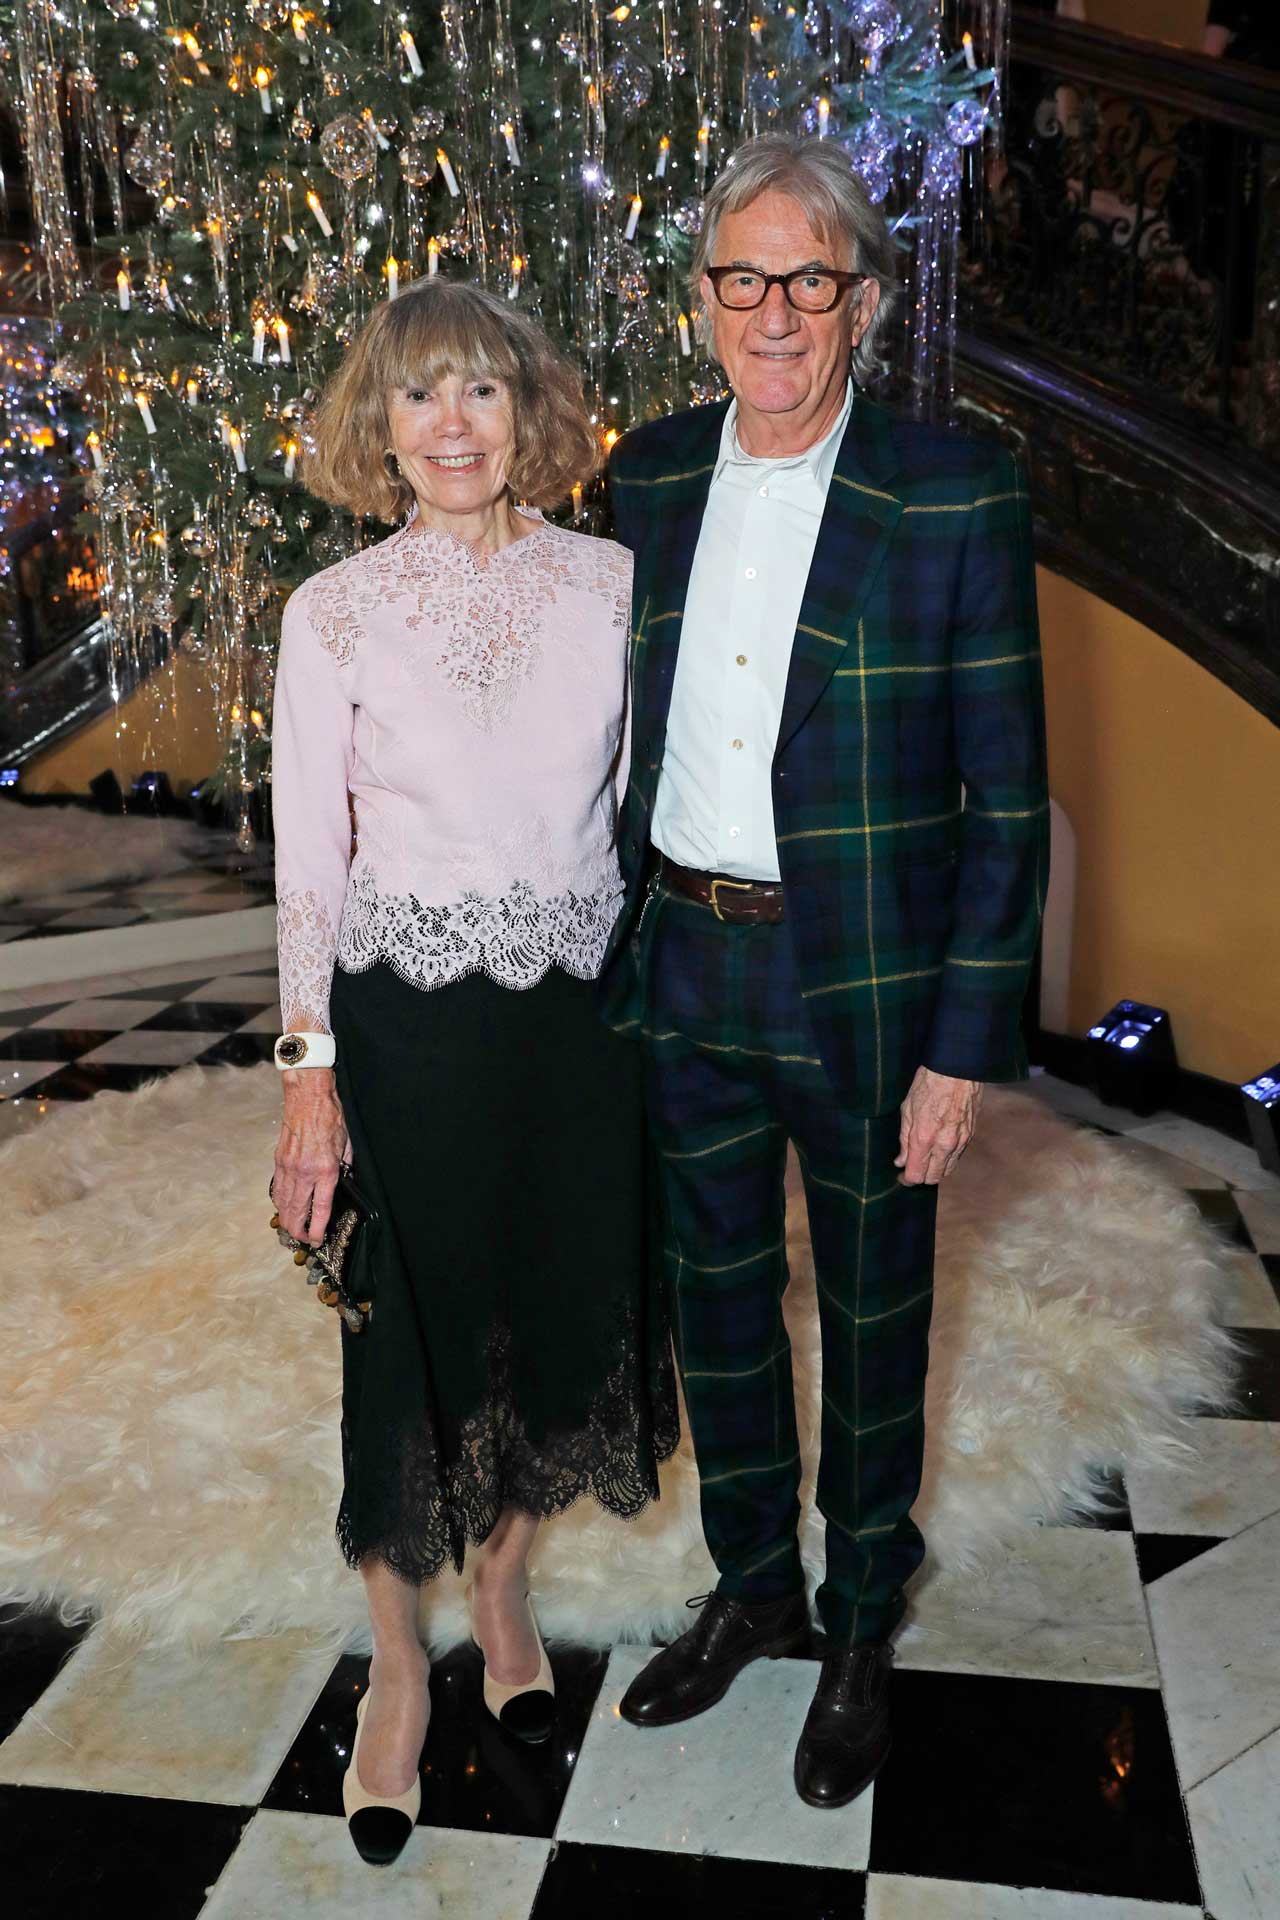 Sir Paul Smith and his wife, Pauline Denyer, at Claridges Christmas party in 2017. Denyer trained in fashion at the Royal College of Art and encouraged Smith to pursue it as a career (Photo: Getty Images)